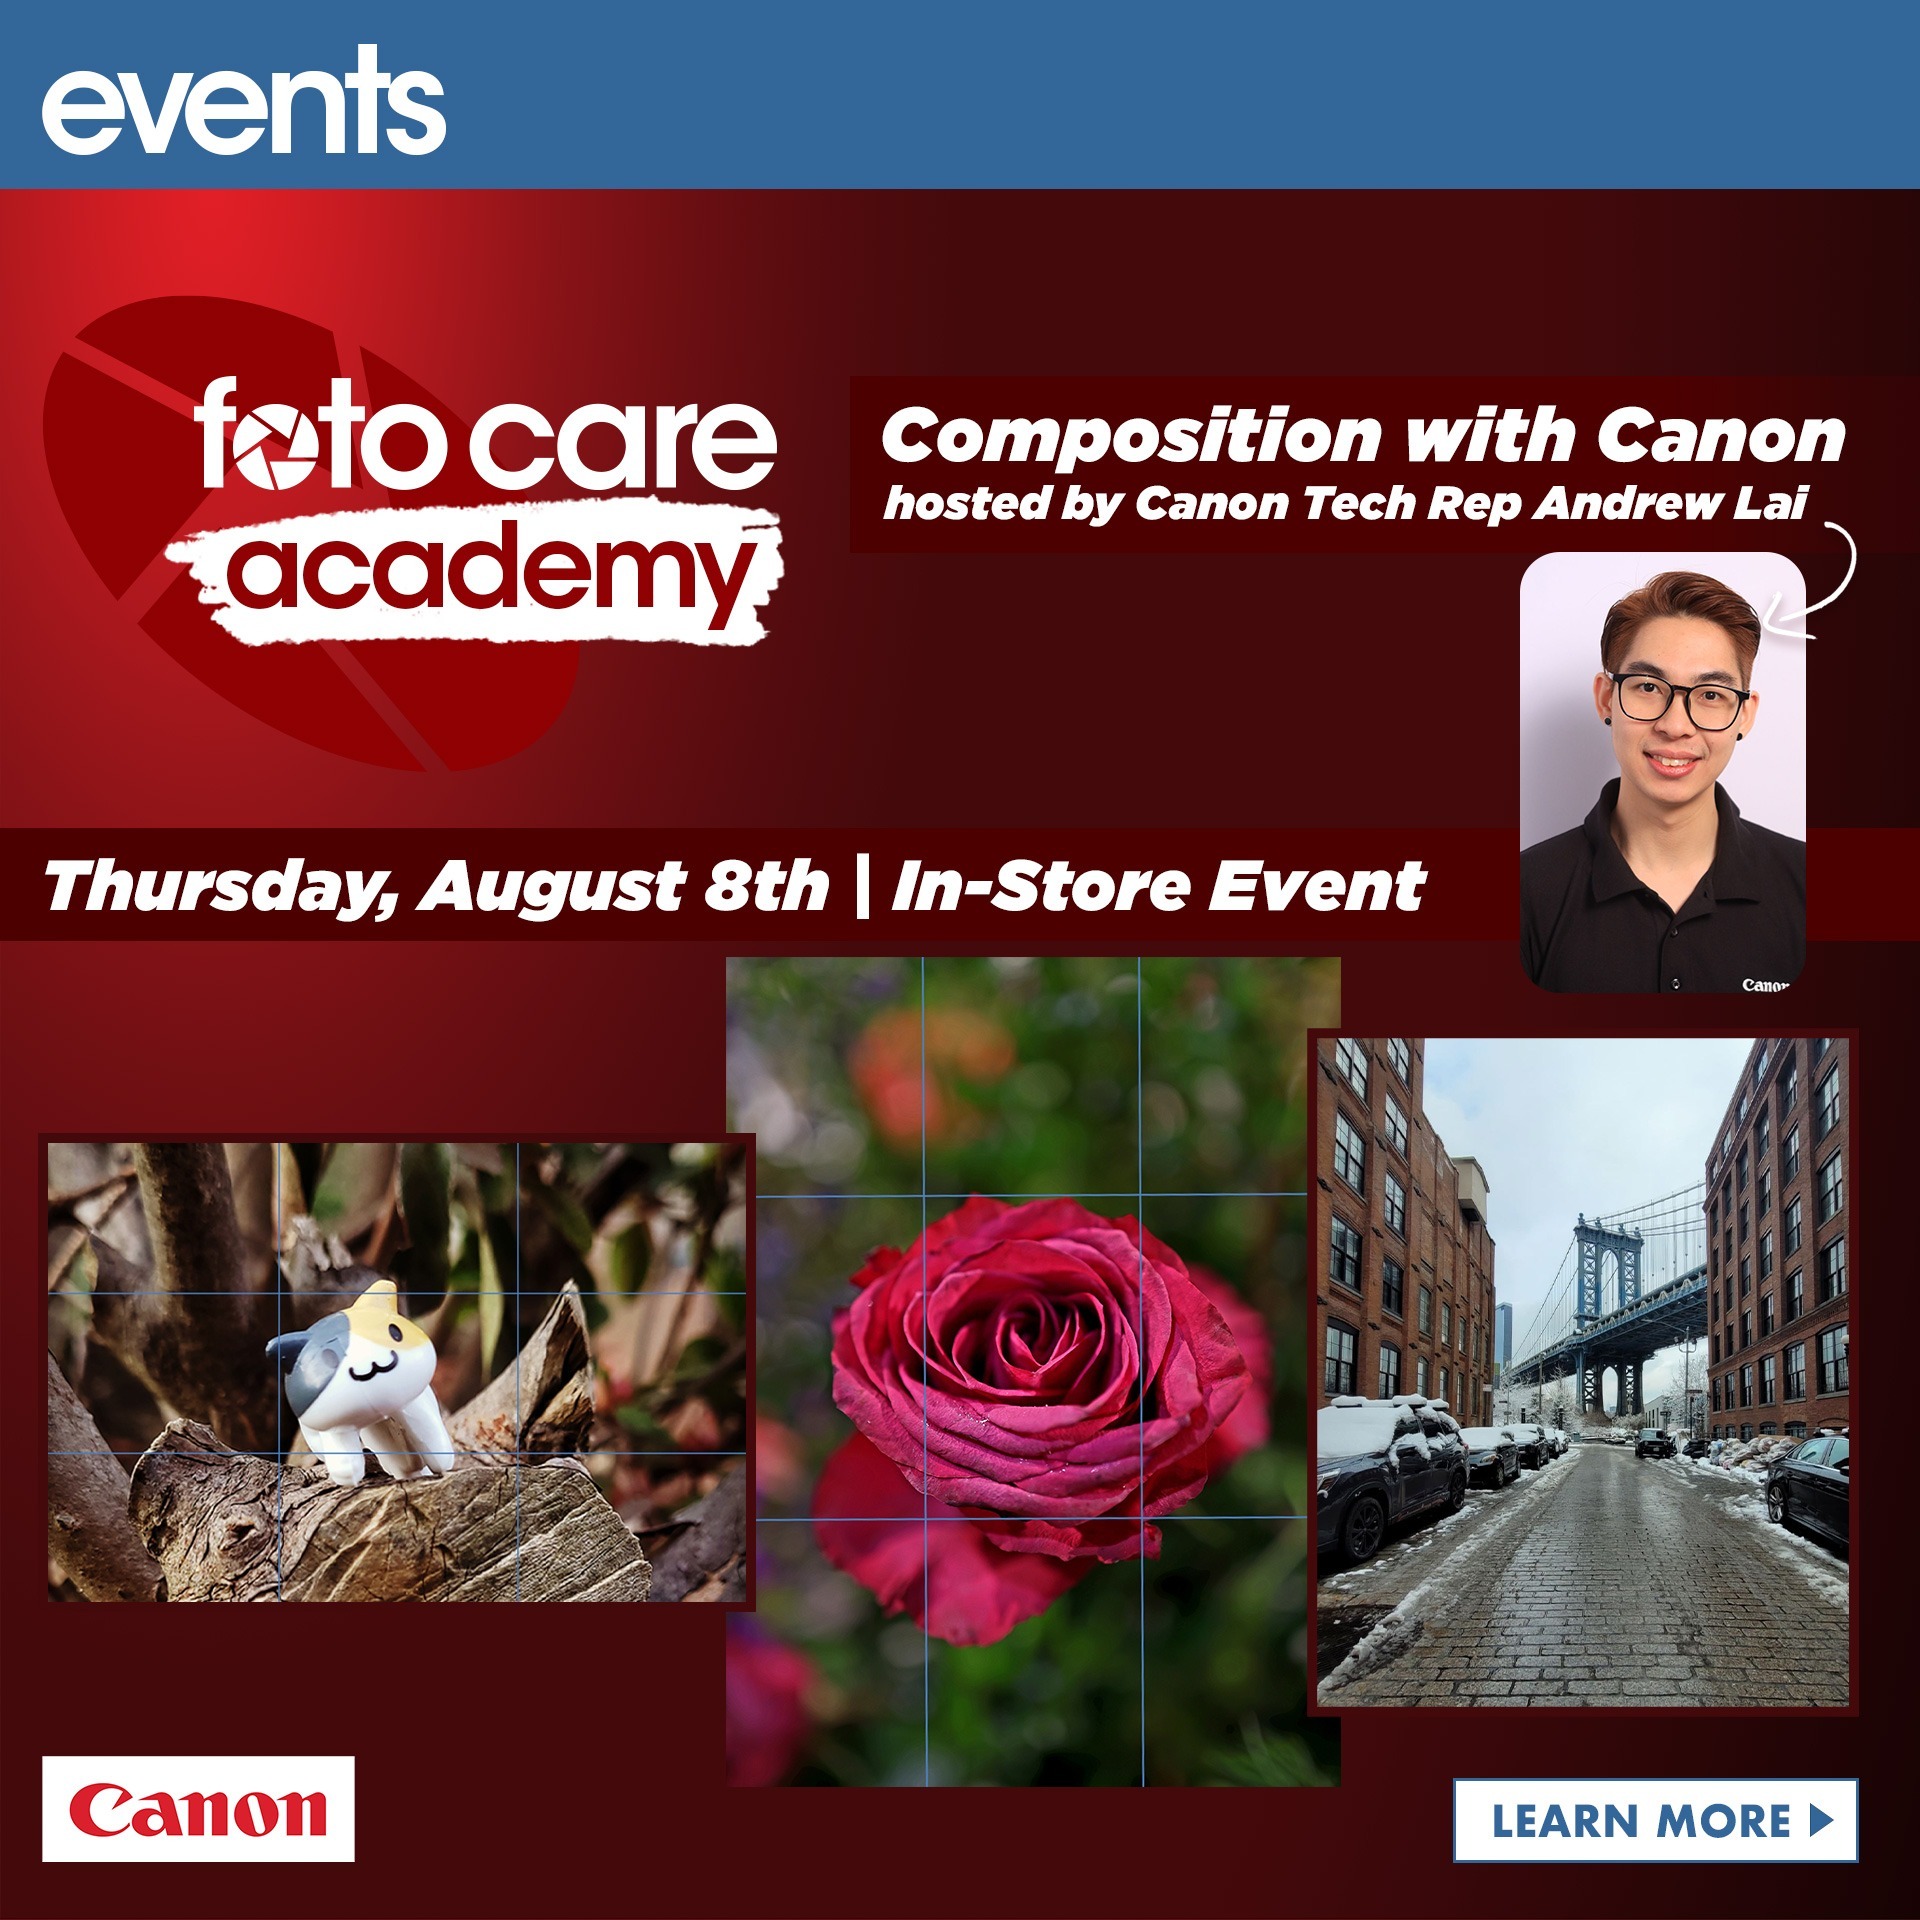 Foto Care Academy - Composition with Canon - August 8th. Learn More